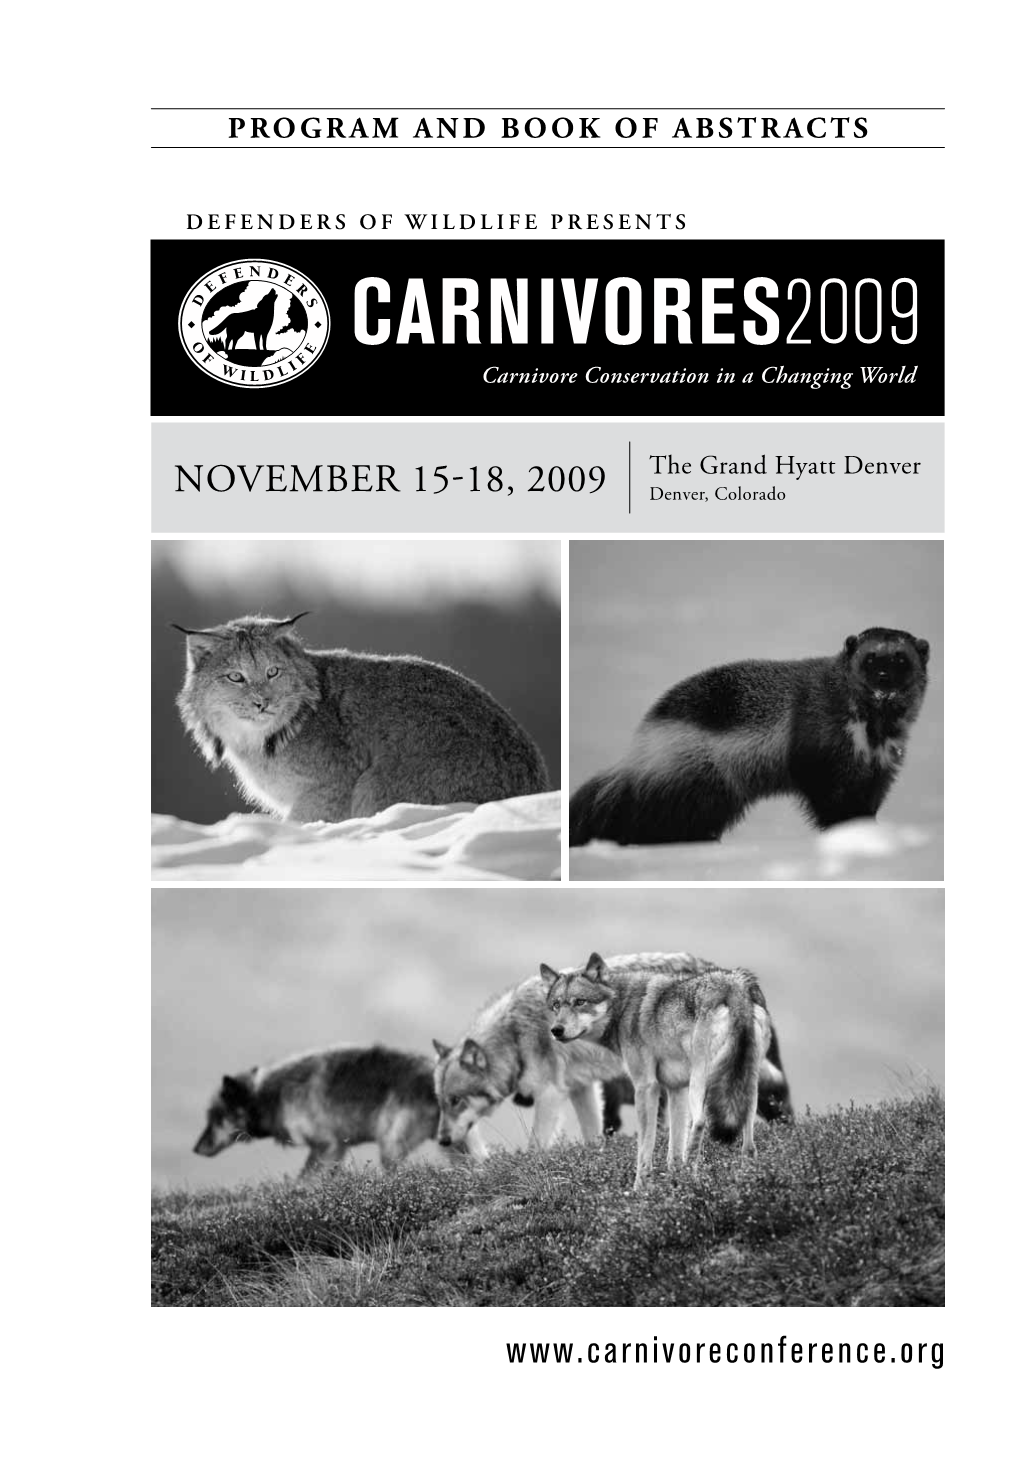 Effects of Captive Experience on Carnivores Released Into the Wild